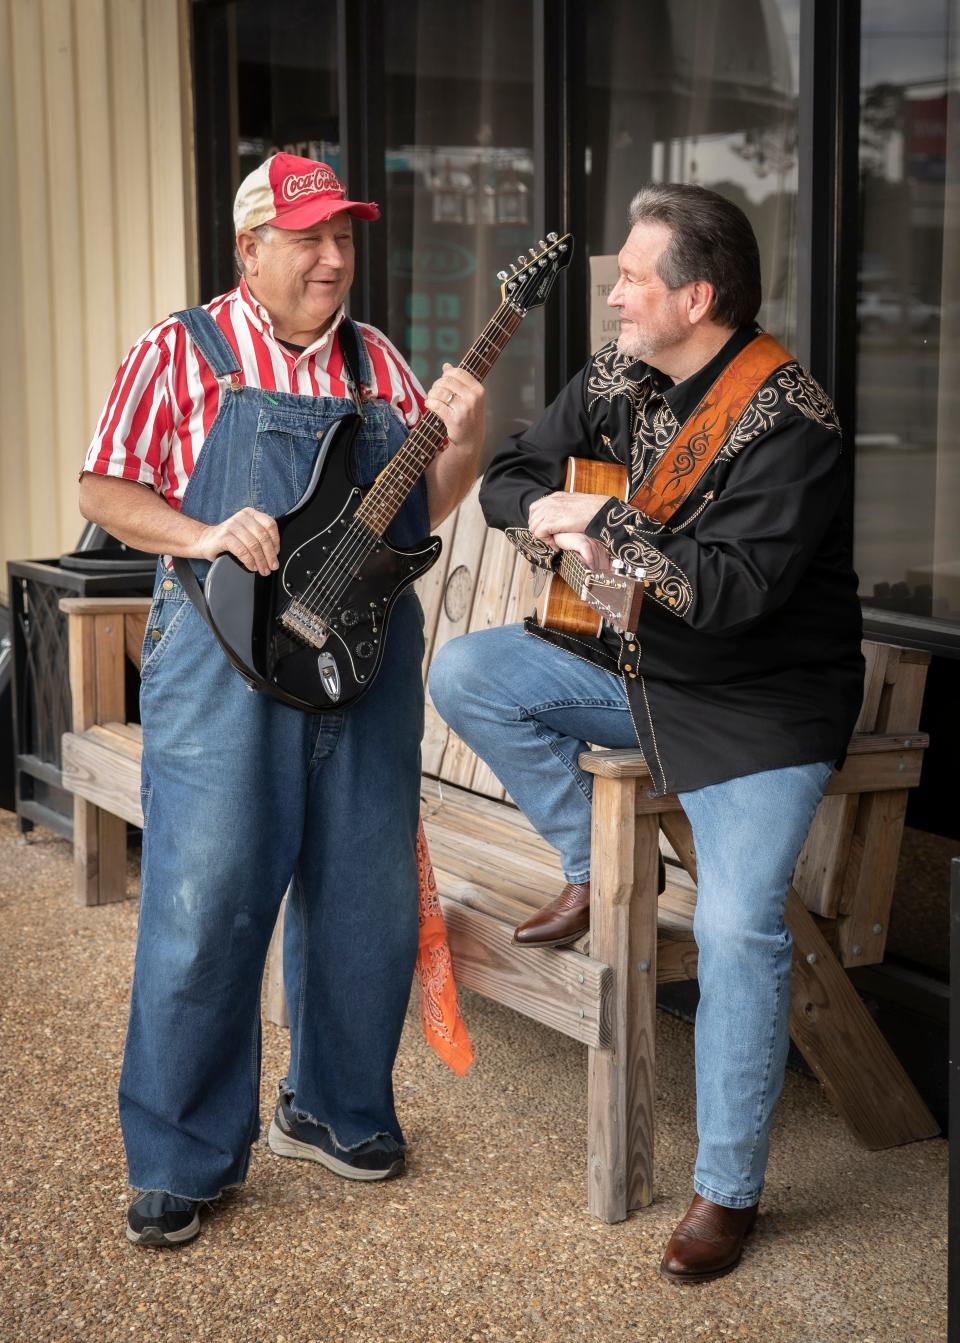 Brothers Dennis “Moonshine” Rader and Billy Rader are continuing their family legacy as musicians in Panama City Beach with separate shows in the near future.